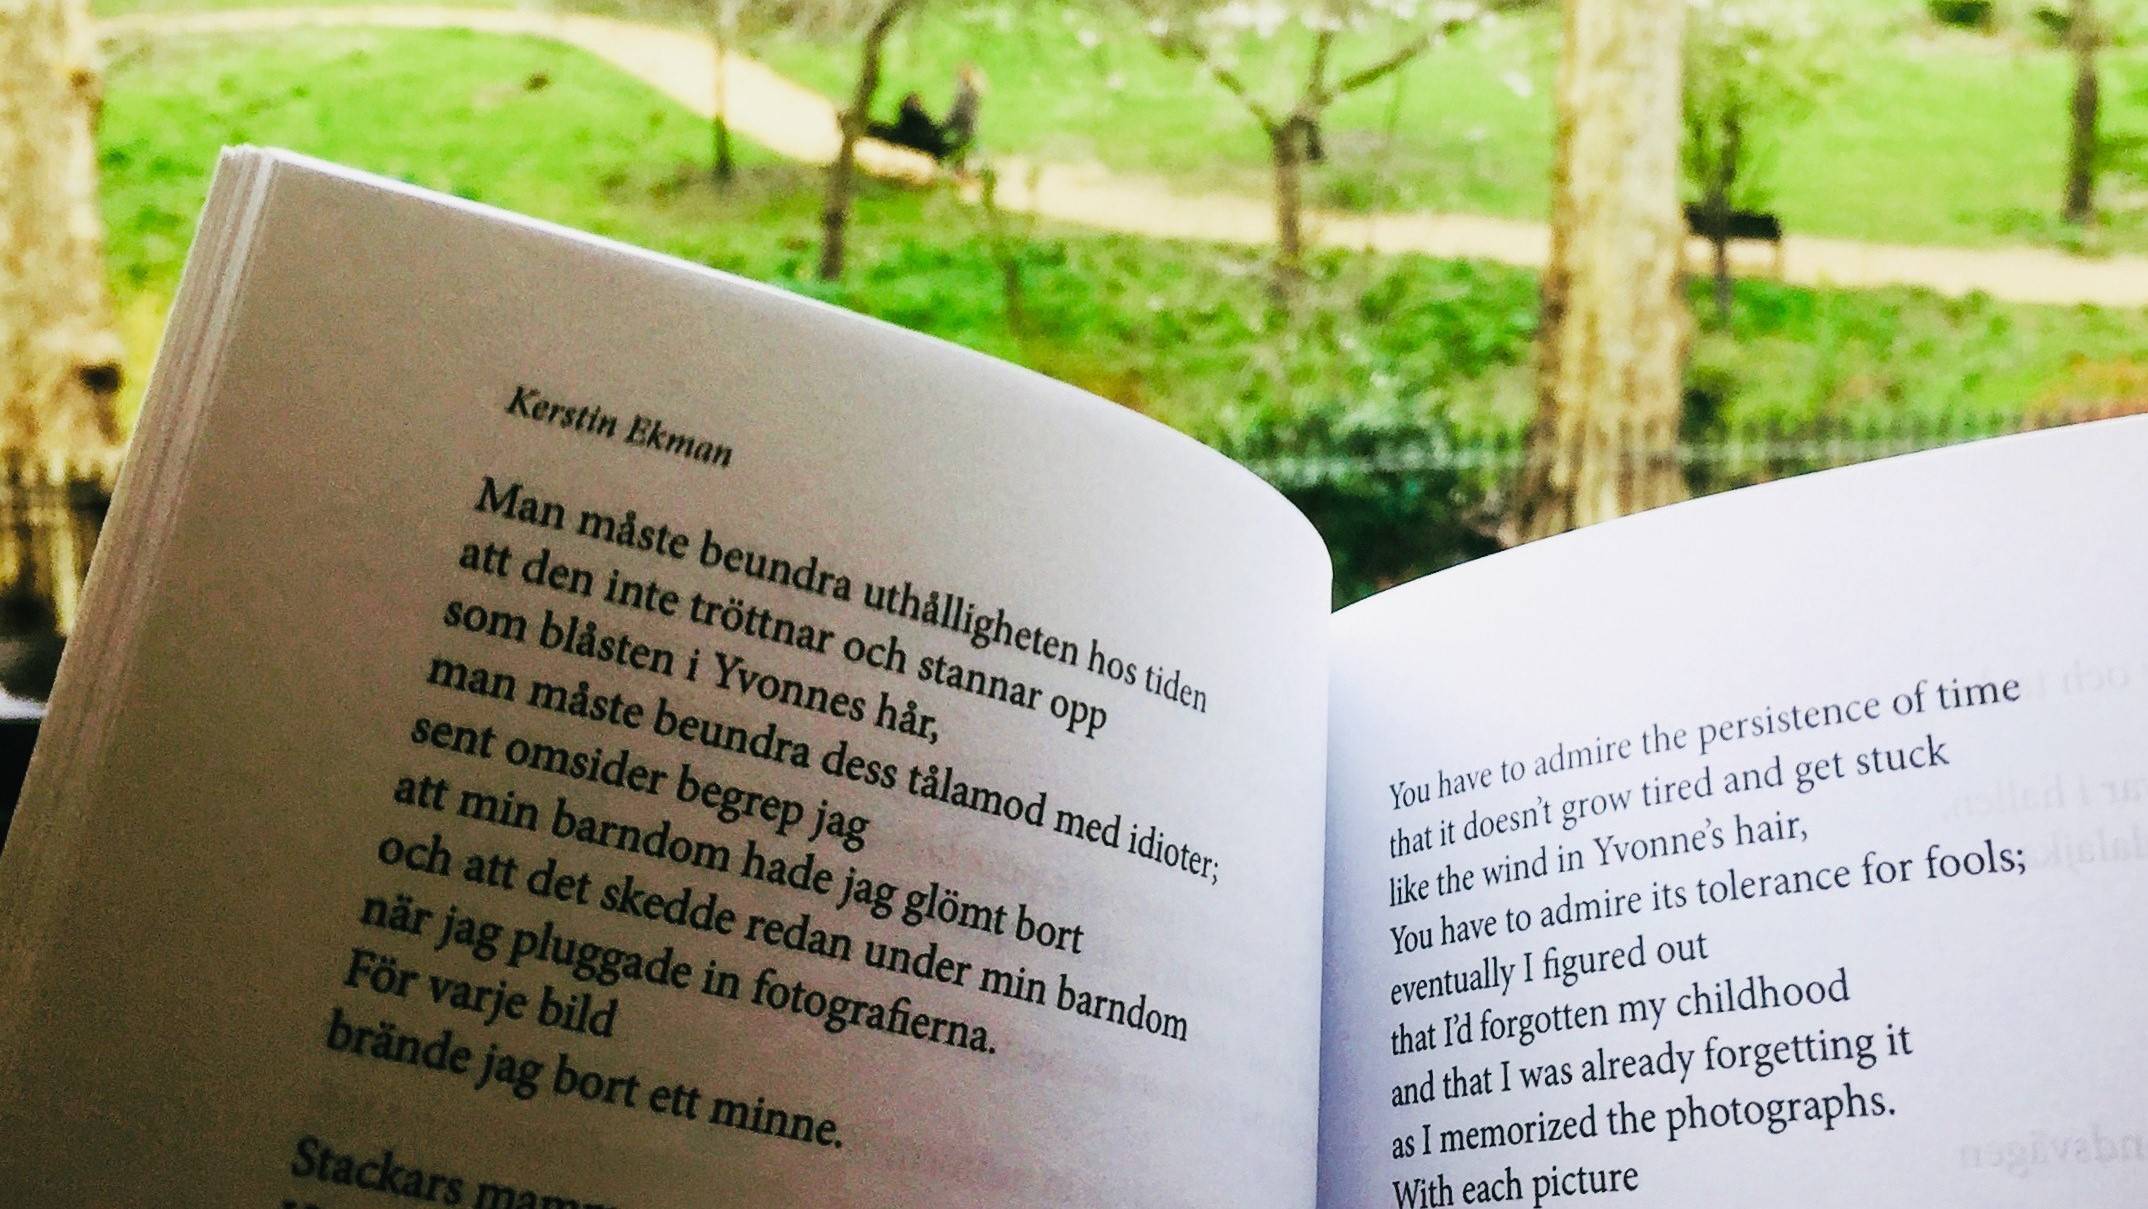 Reading Kerstin Ekman’s Barndom (Childhood), translated from the Swedish by Rochelle Wright for Norvik Press